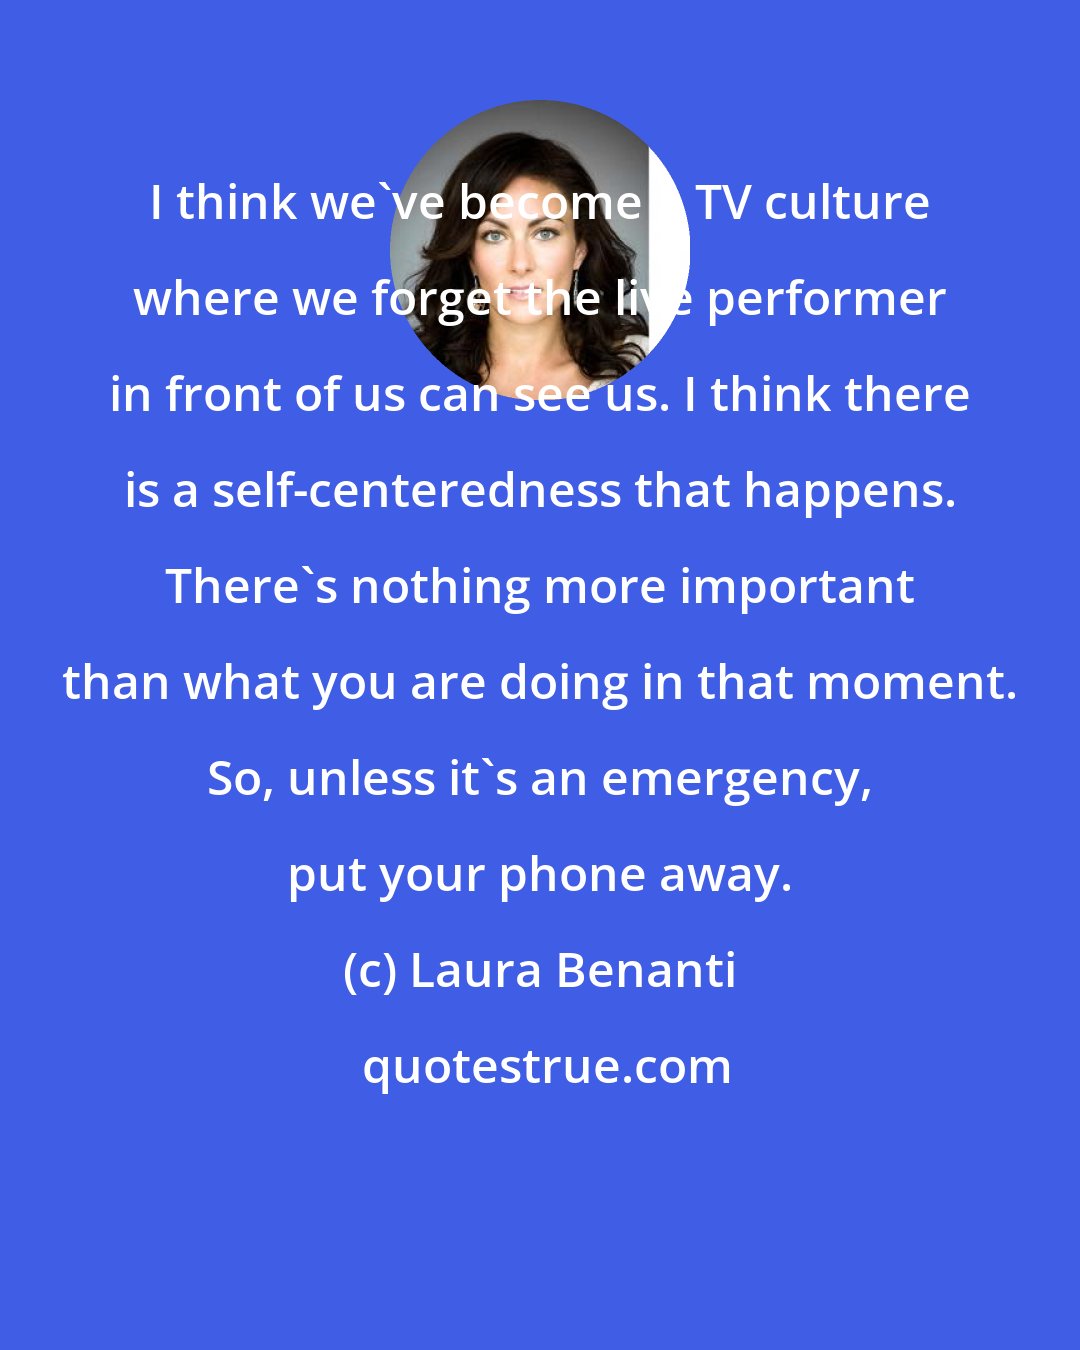 Laura Benanti: I think we've become a TV culture where we forget the live performer in front of us can see us. I think there is a self-centeredness that happens. There's nothing more important than what you are doing in that moment. So, unless it's an emergency, put your phone away.